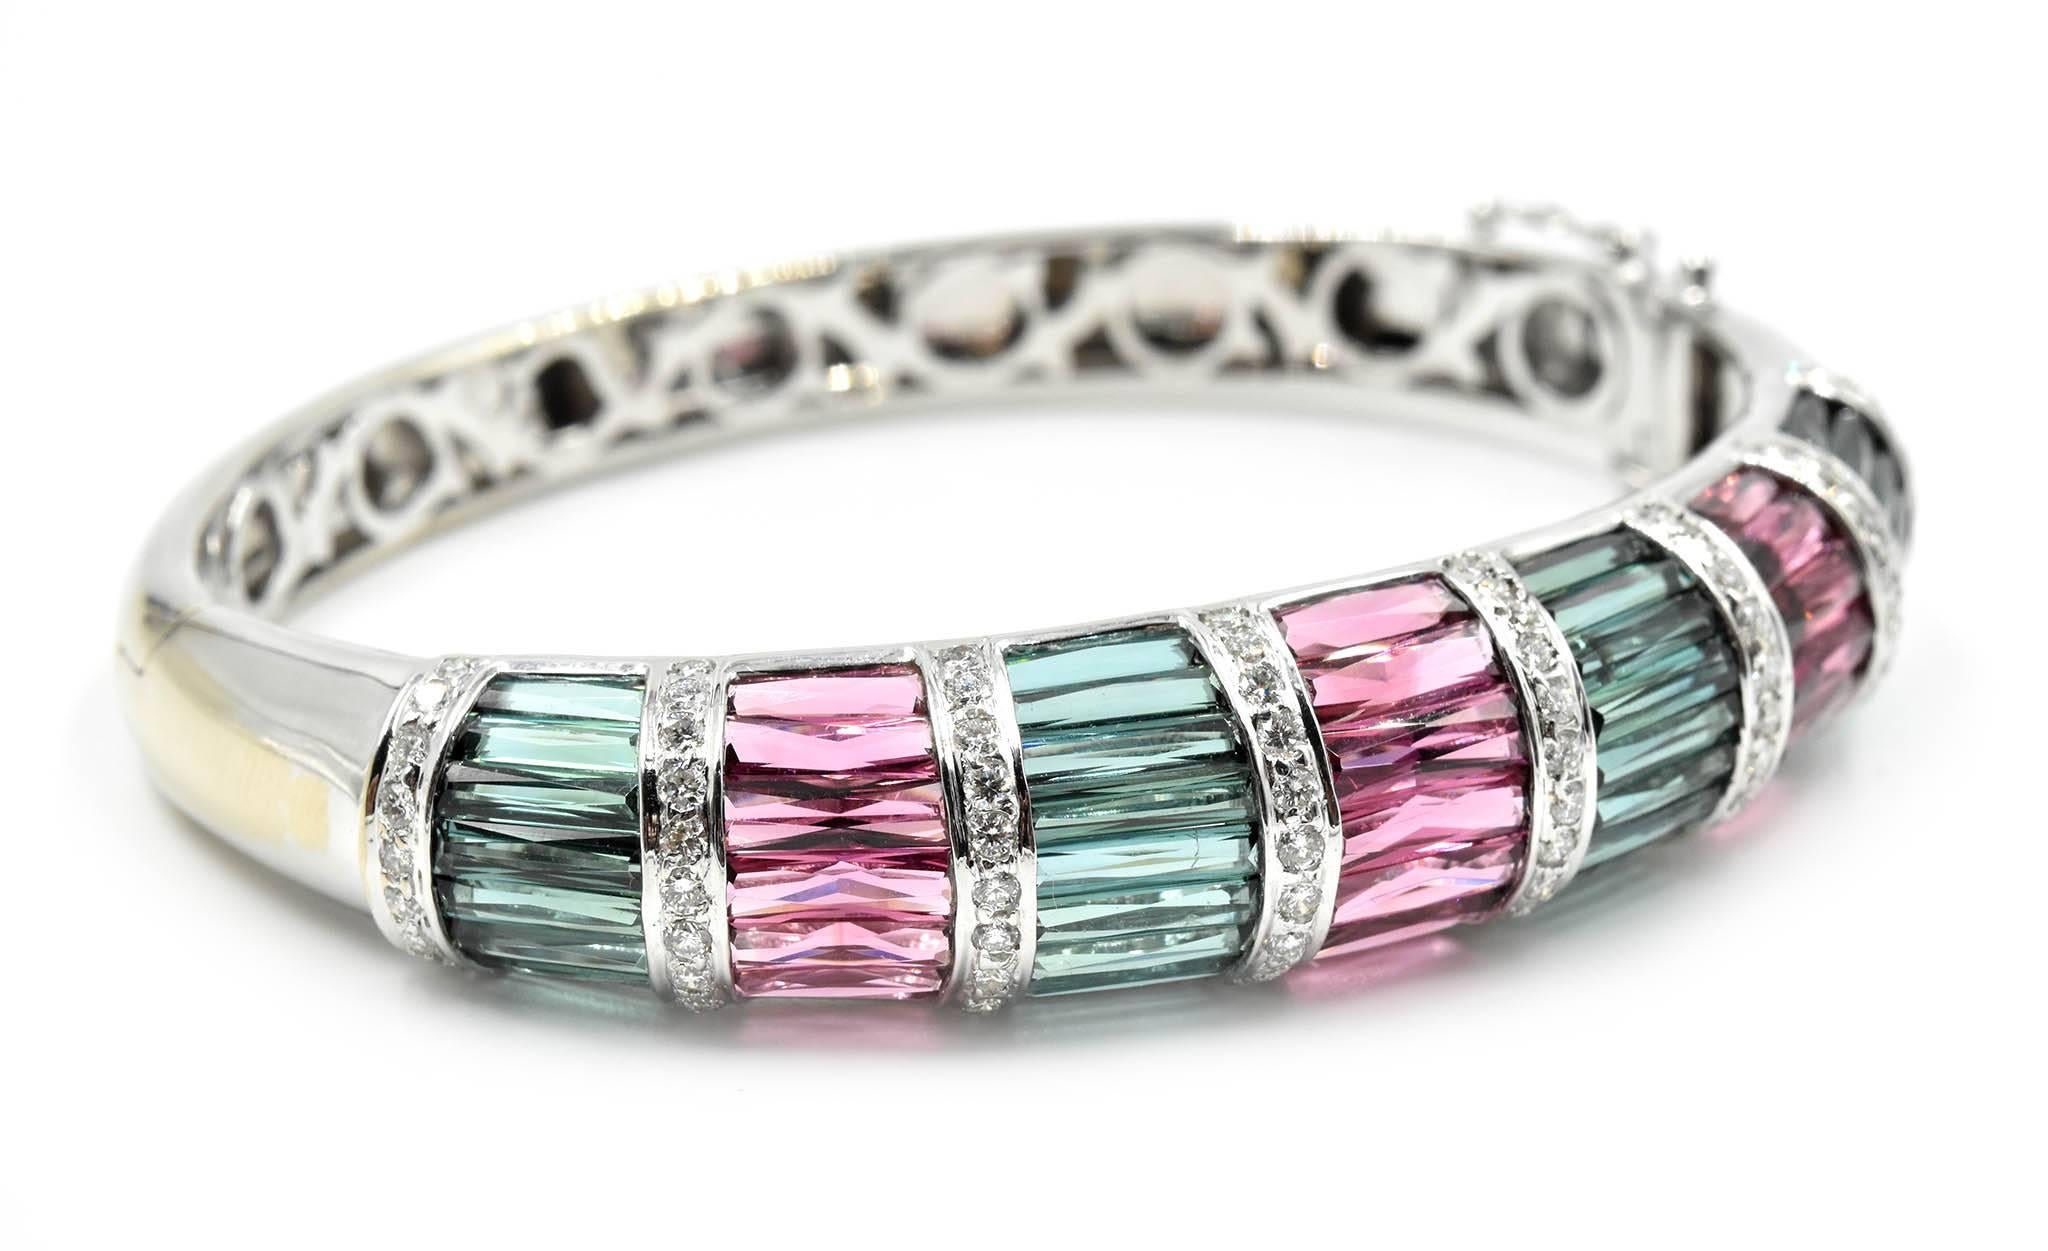 Designer: custom design
Material: 18k white gold
Diamonds: 74 round brilliant cuts = 1.11 carat total weight
Tourmaline: Pink and Turquoise tourmaline
Color: G-H
Clarity: SI
Dimensions: bangle will fit up to 6.5 inch wrist, top of bangle is a ½ inch